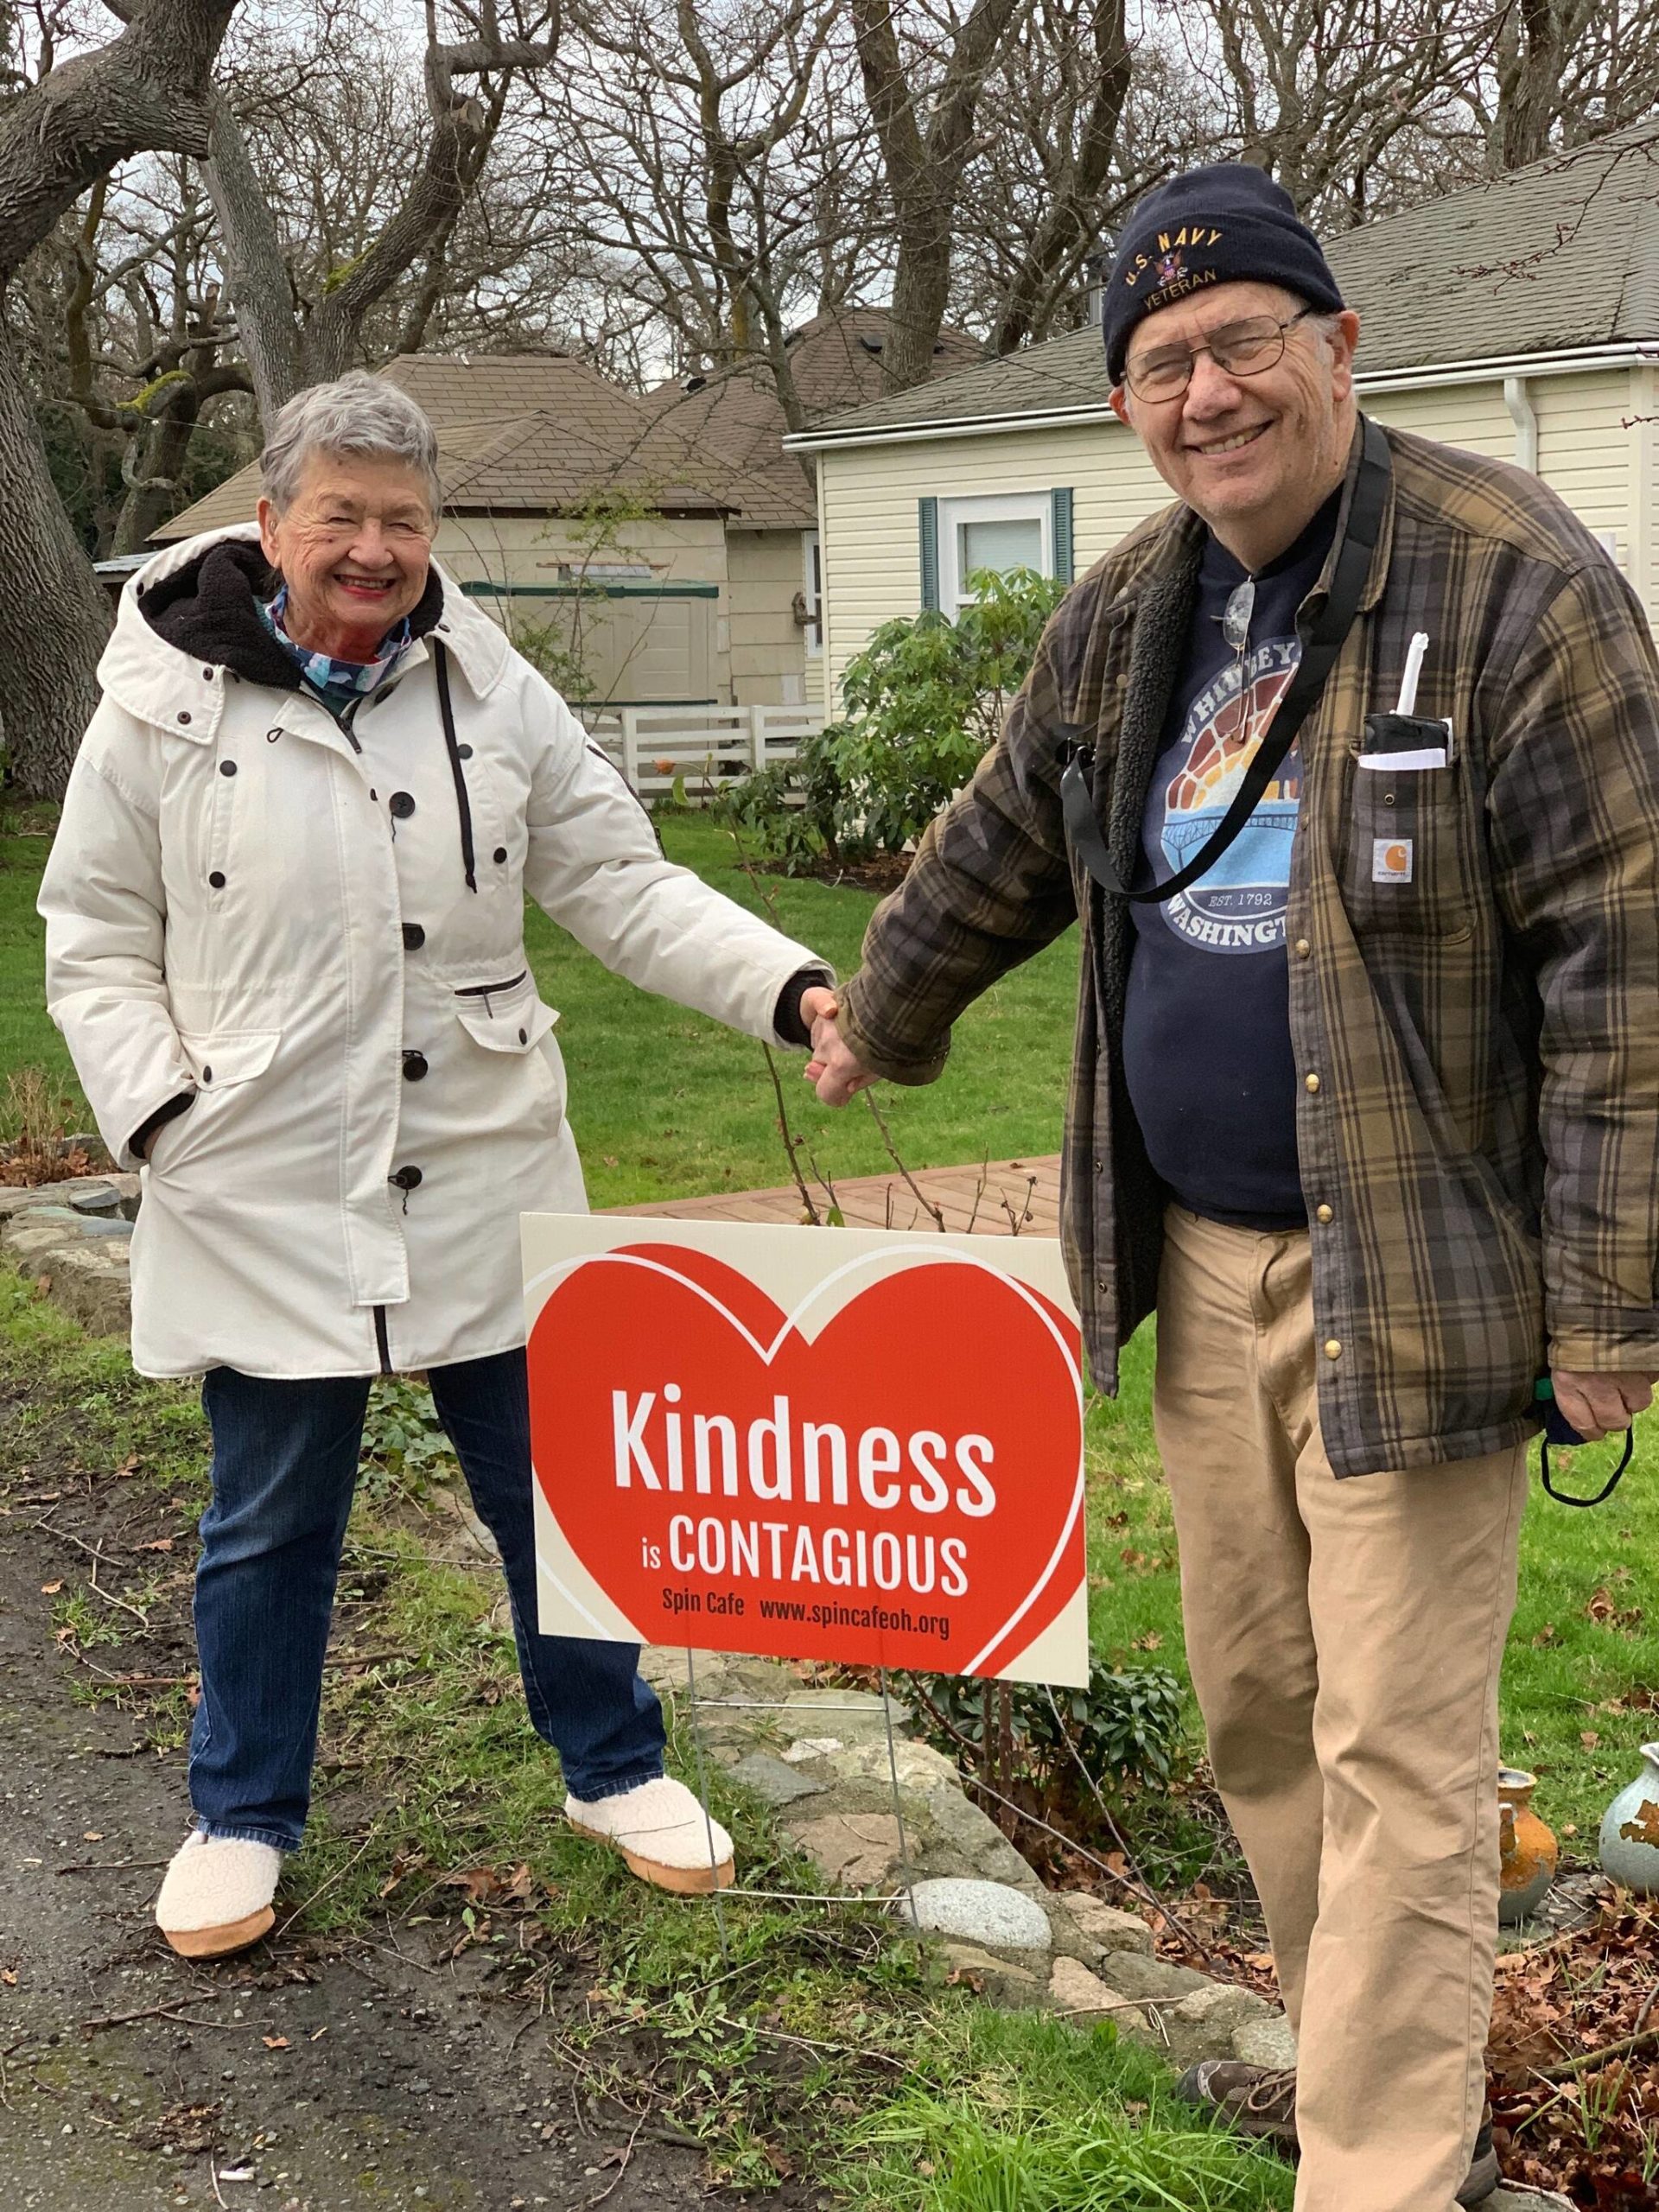 Photo provided
Carol and Bob Wall display a "Kindness is Contagious" sign from the campaign they founded to promote civil discourse.